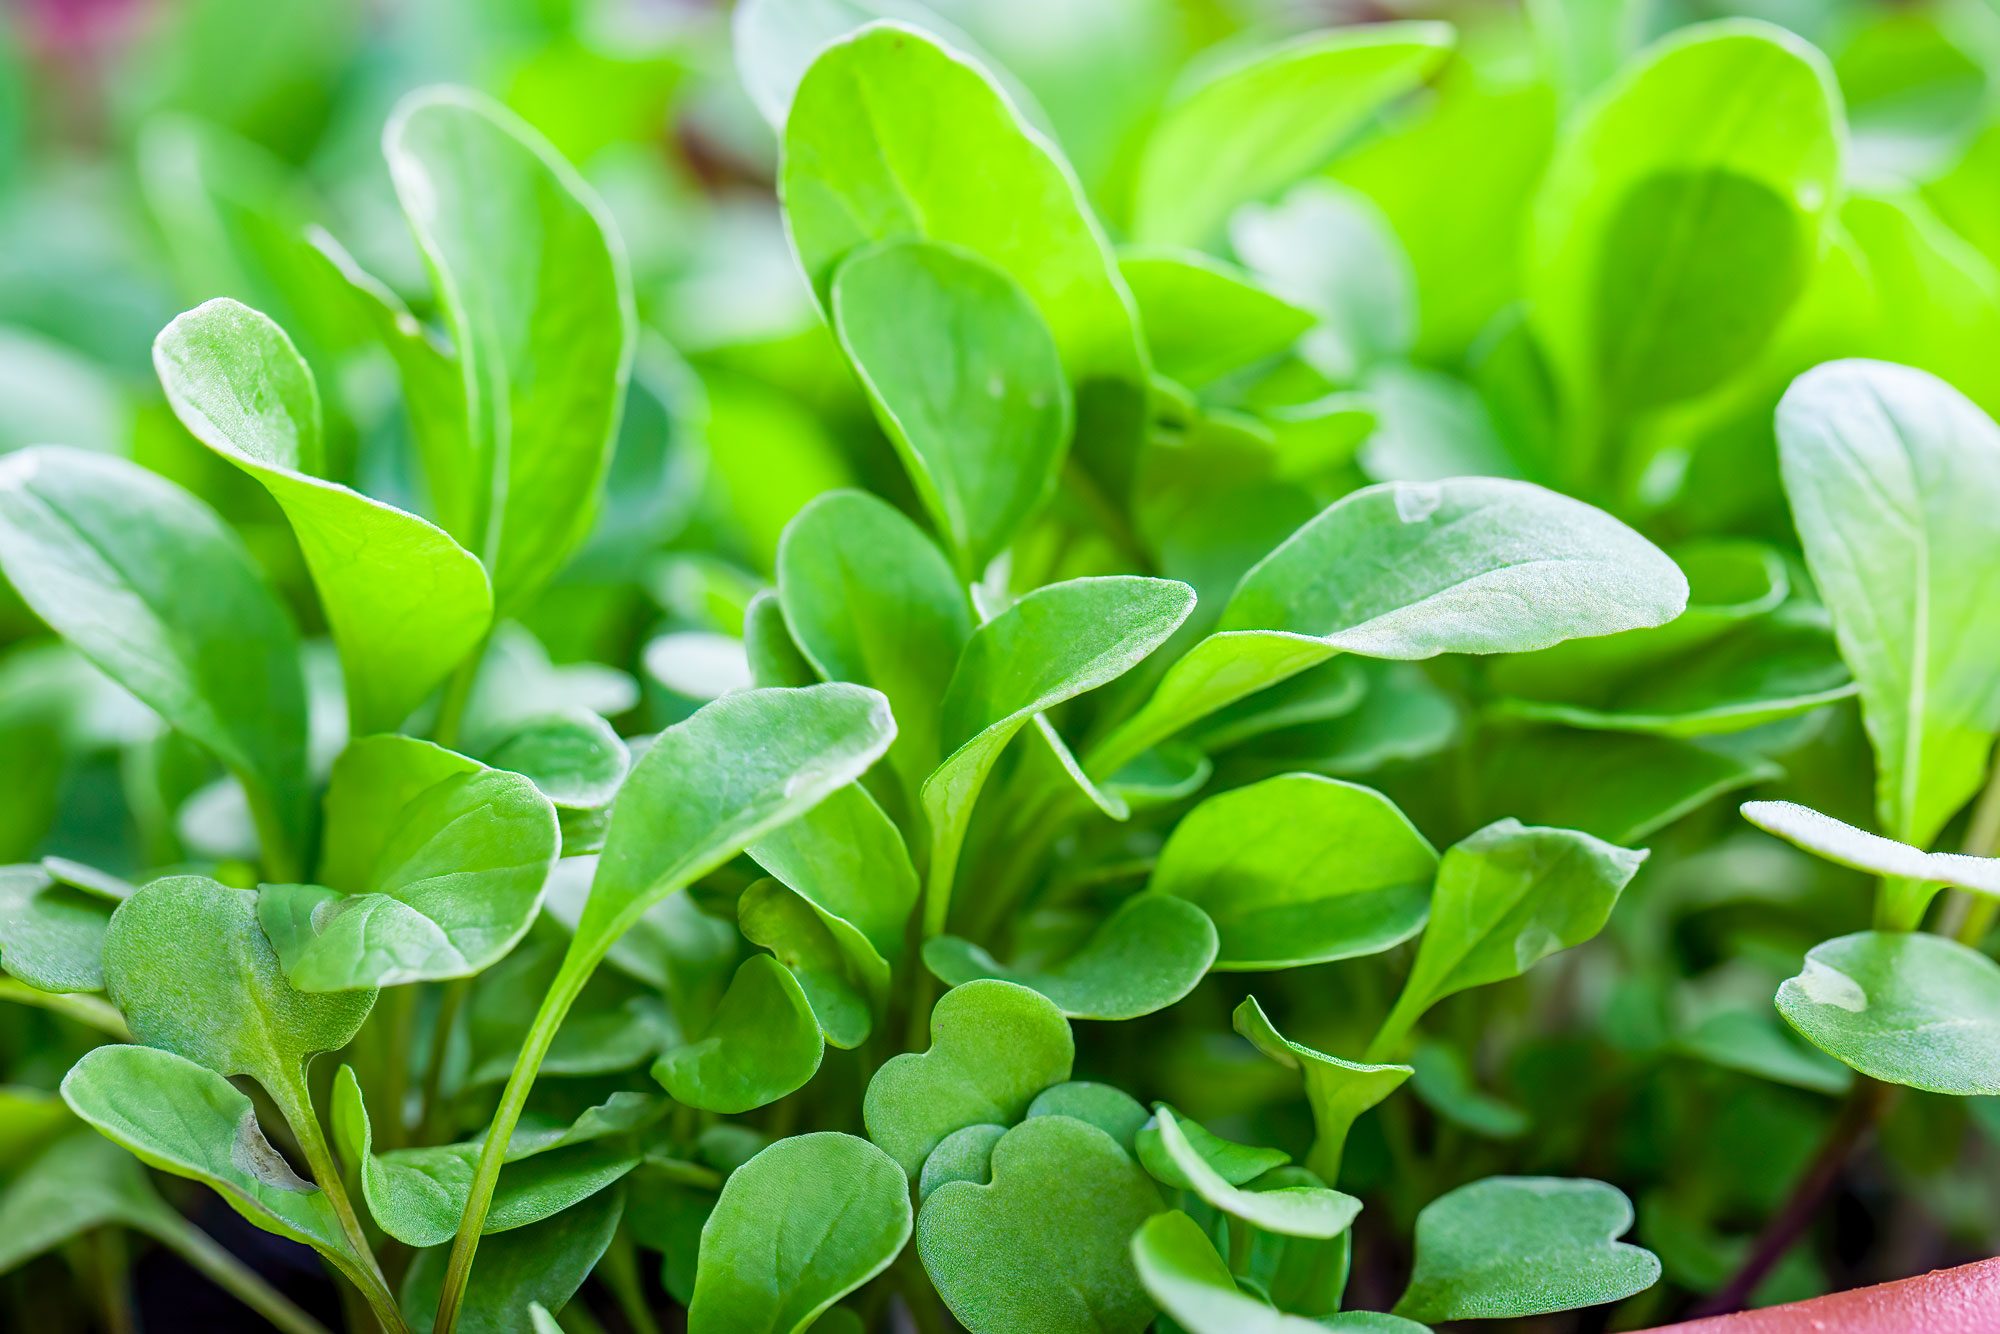 watercress is the healthiest vegetable|